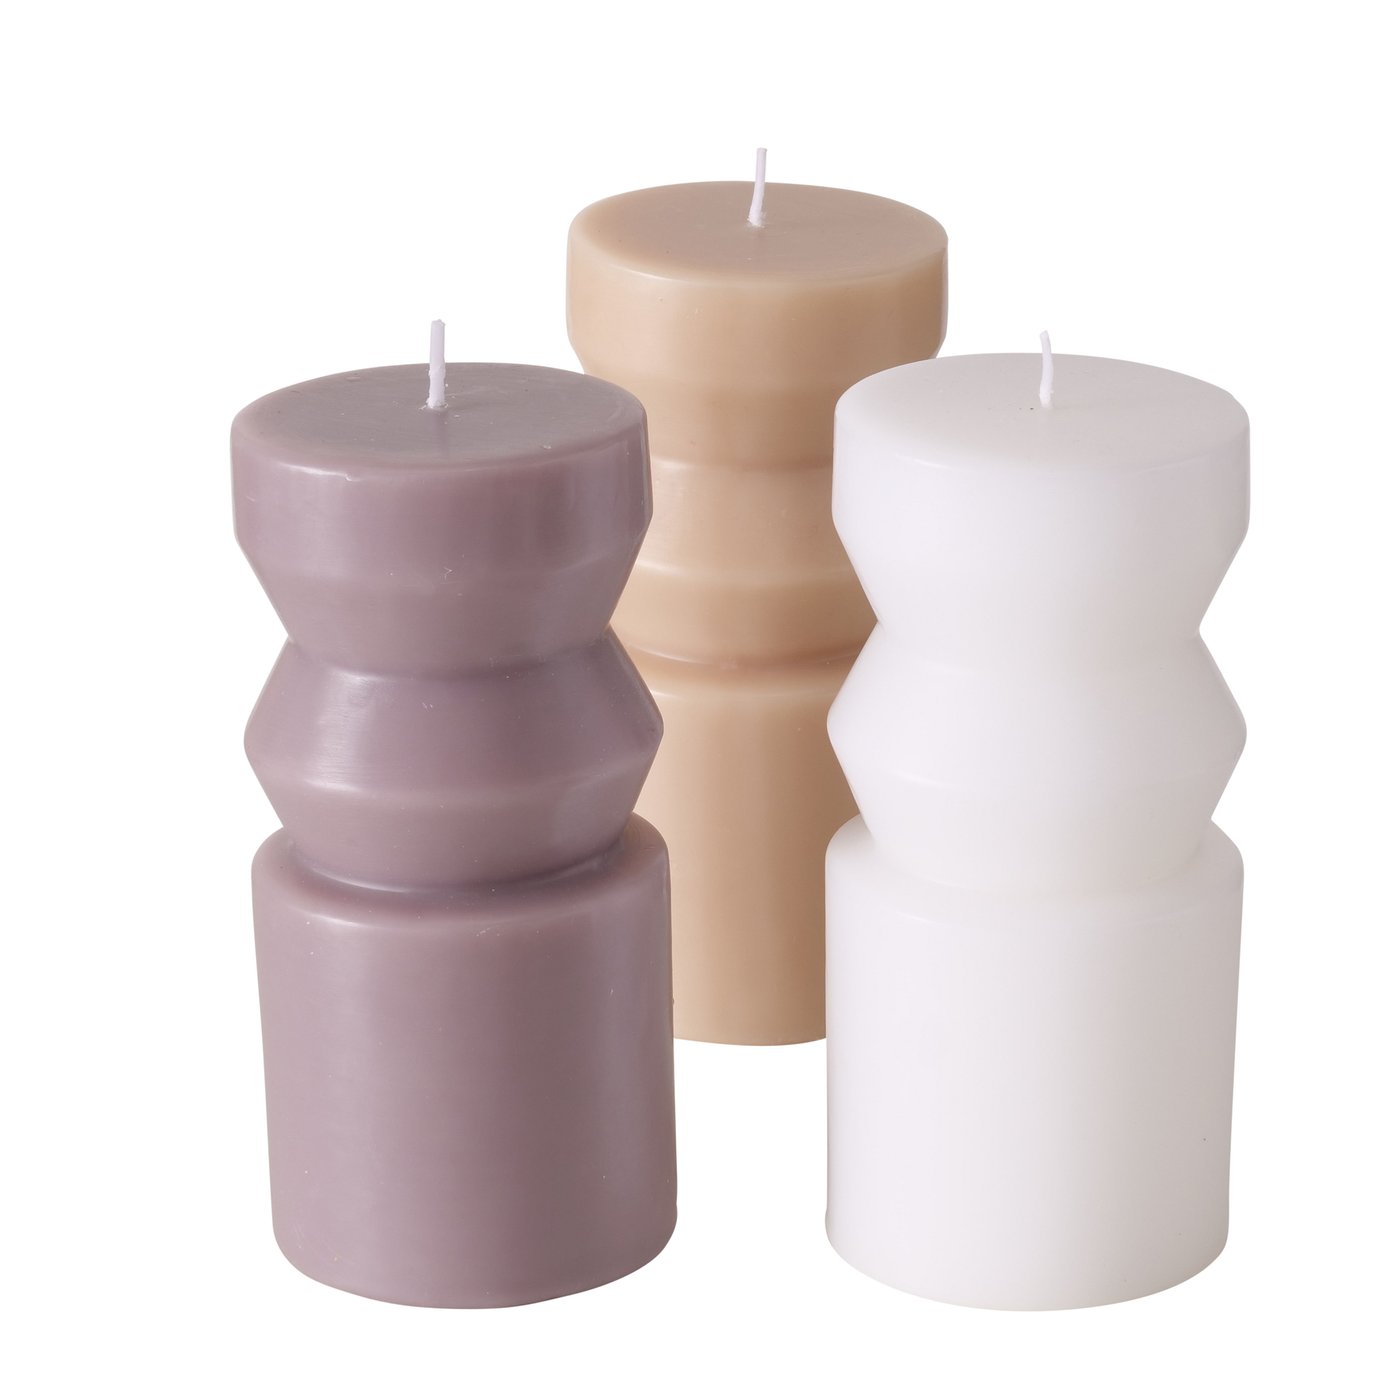 &Quirky Celona Pillar Candle : Beige, Brown or White